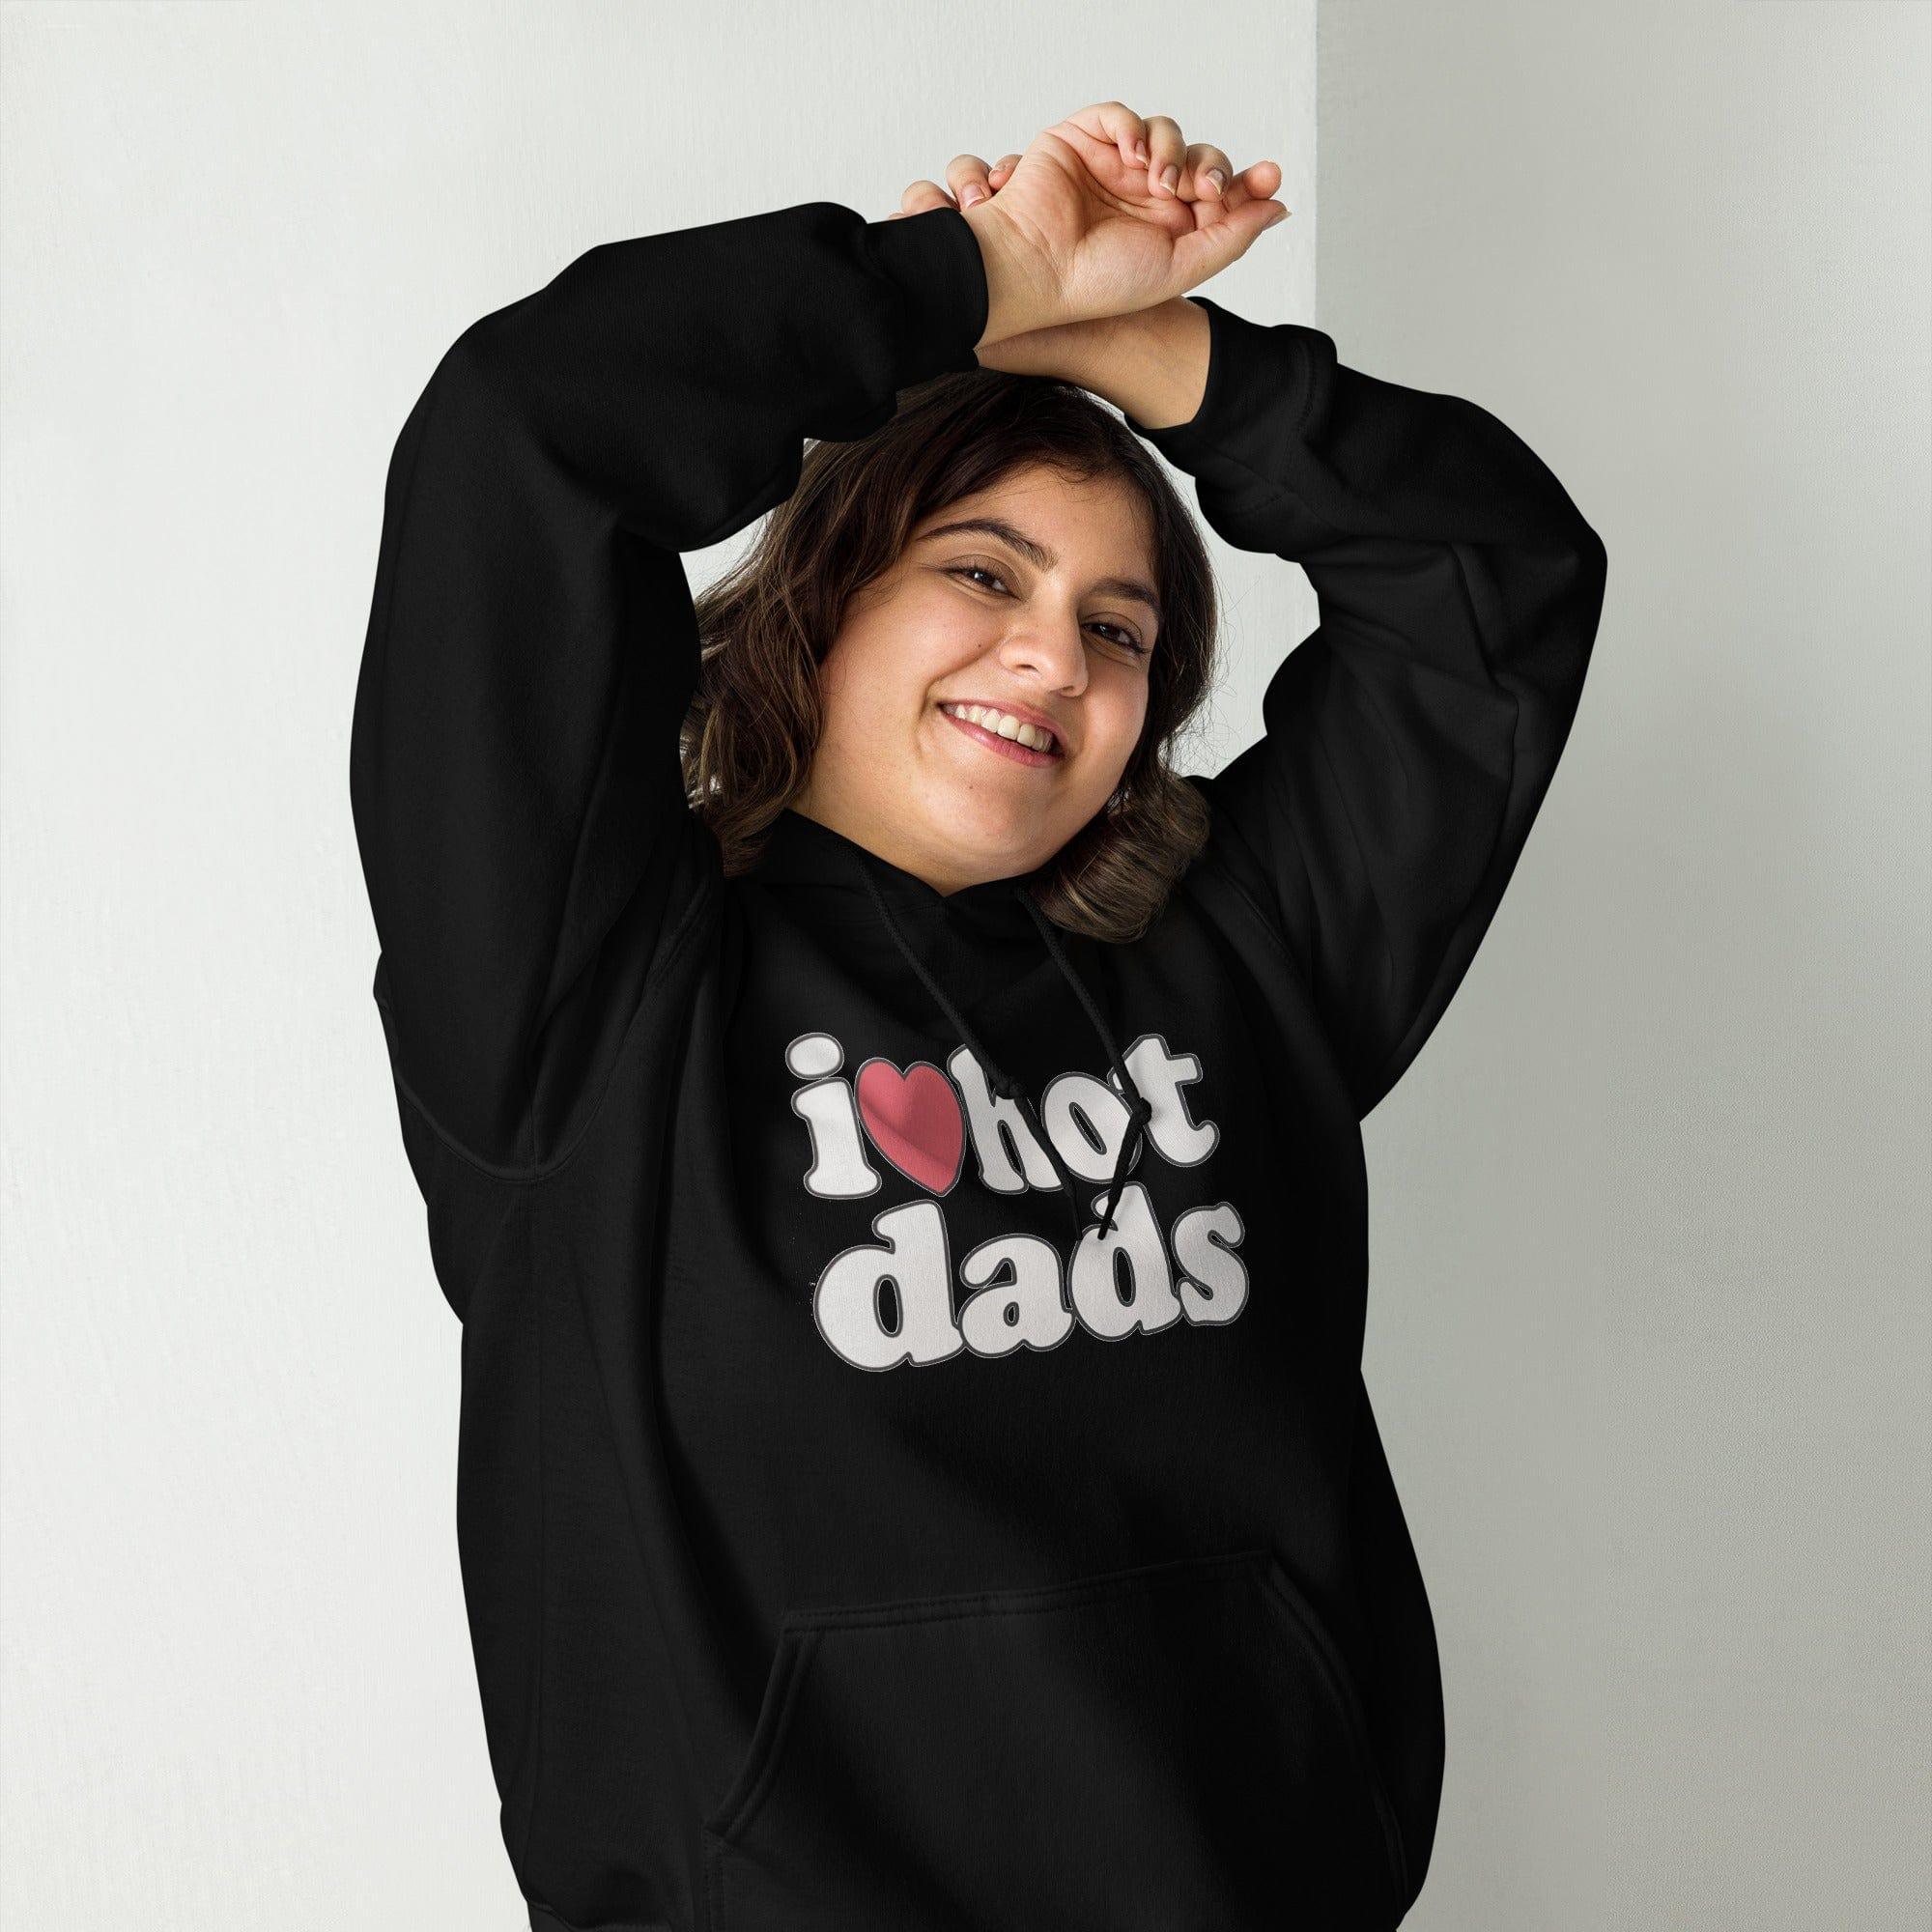 Casual Hoodie I Love Hot Dads with Heart Shaped Love Unisex Pullover - TopKoalaTee